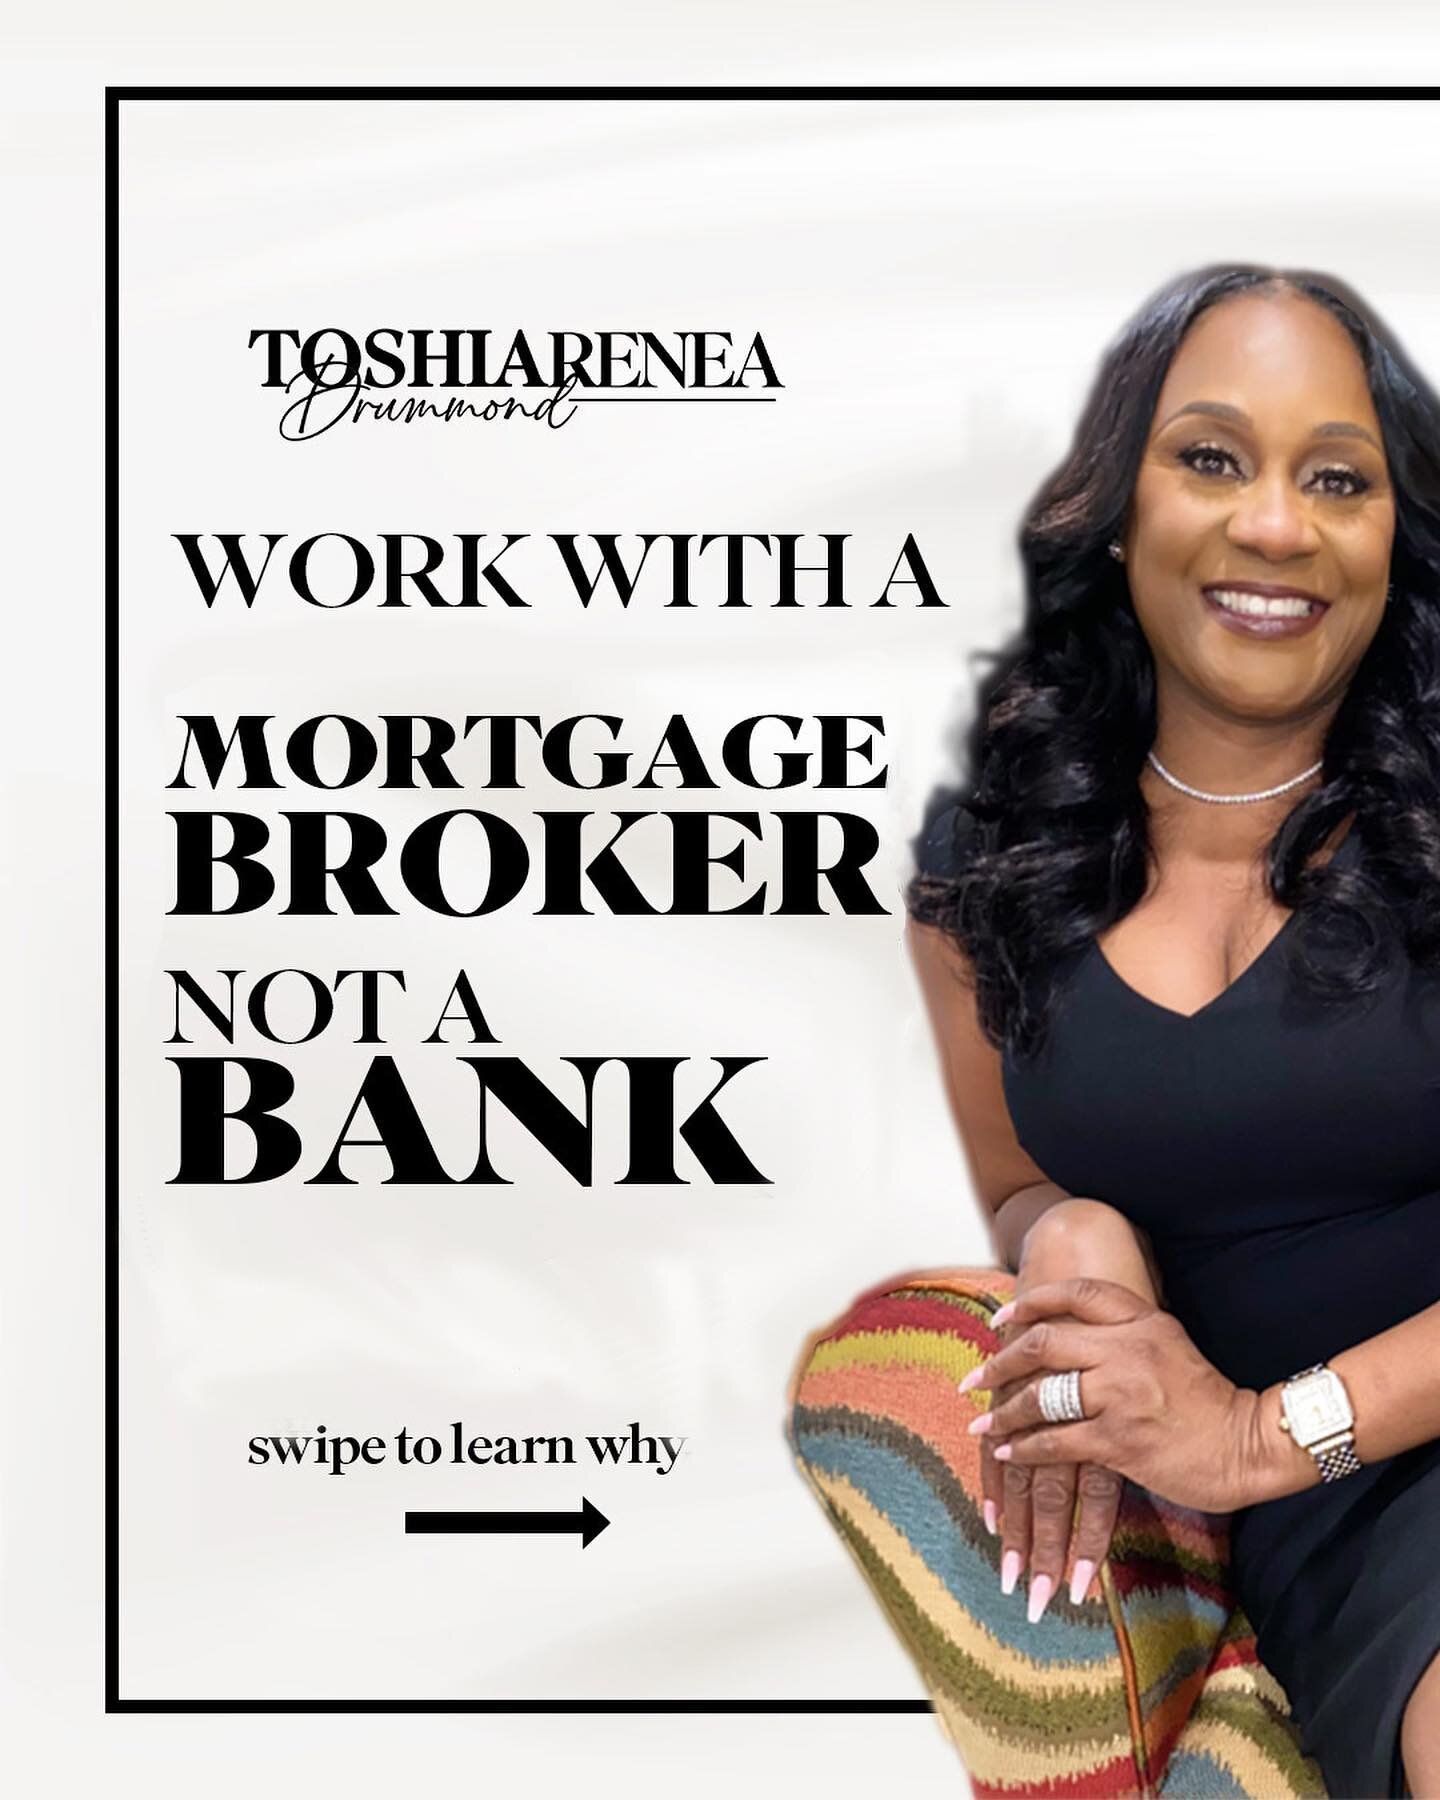 Unlocking Homeownership Dreams with a Mortgage Broker, Not a Bank! 🏡💼

Why settle for a one-size-fits-all approach when you can have personalized guidance tailored to your unique needs? 🤝 Enjoy the flexibility to find the perfect mortgage solution